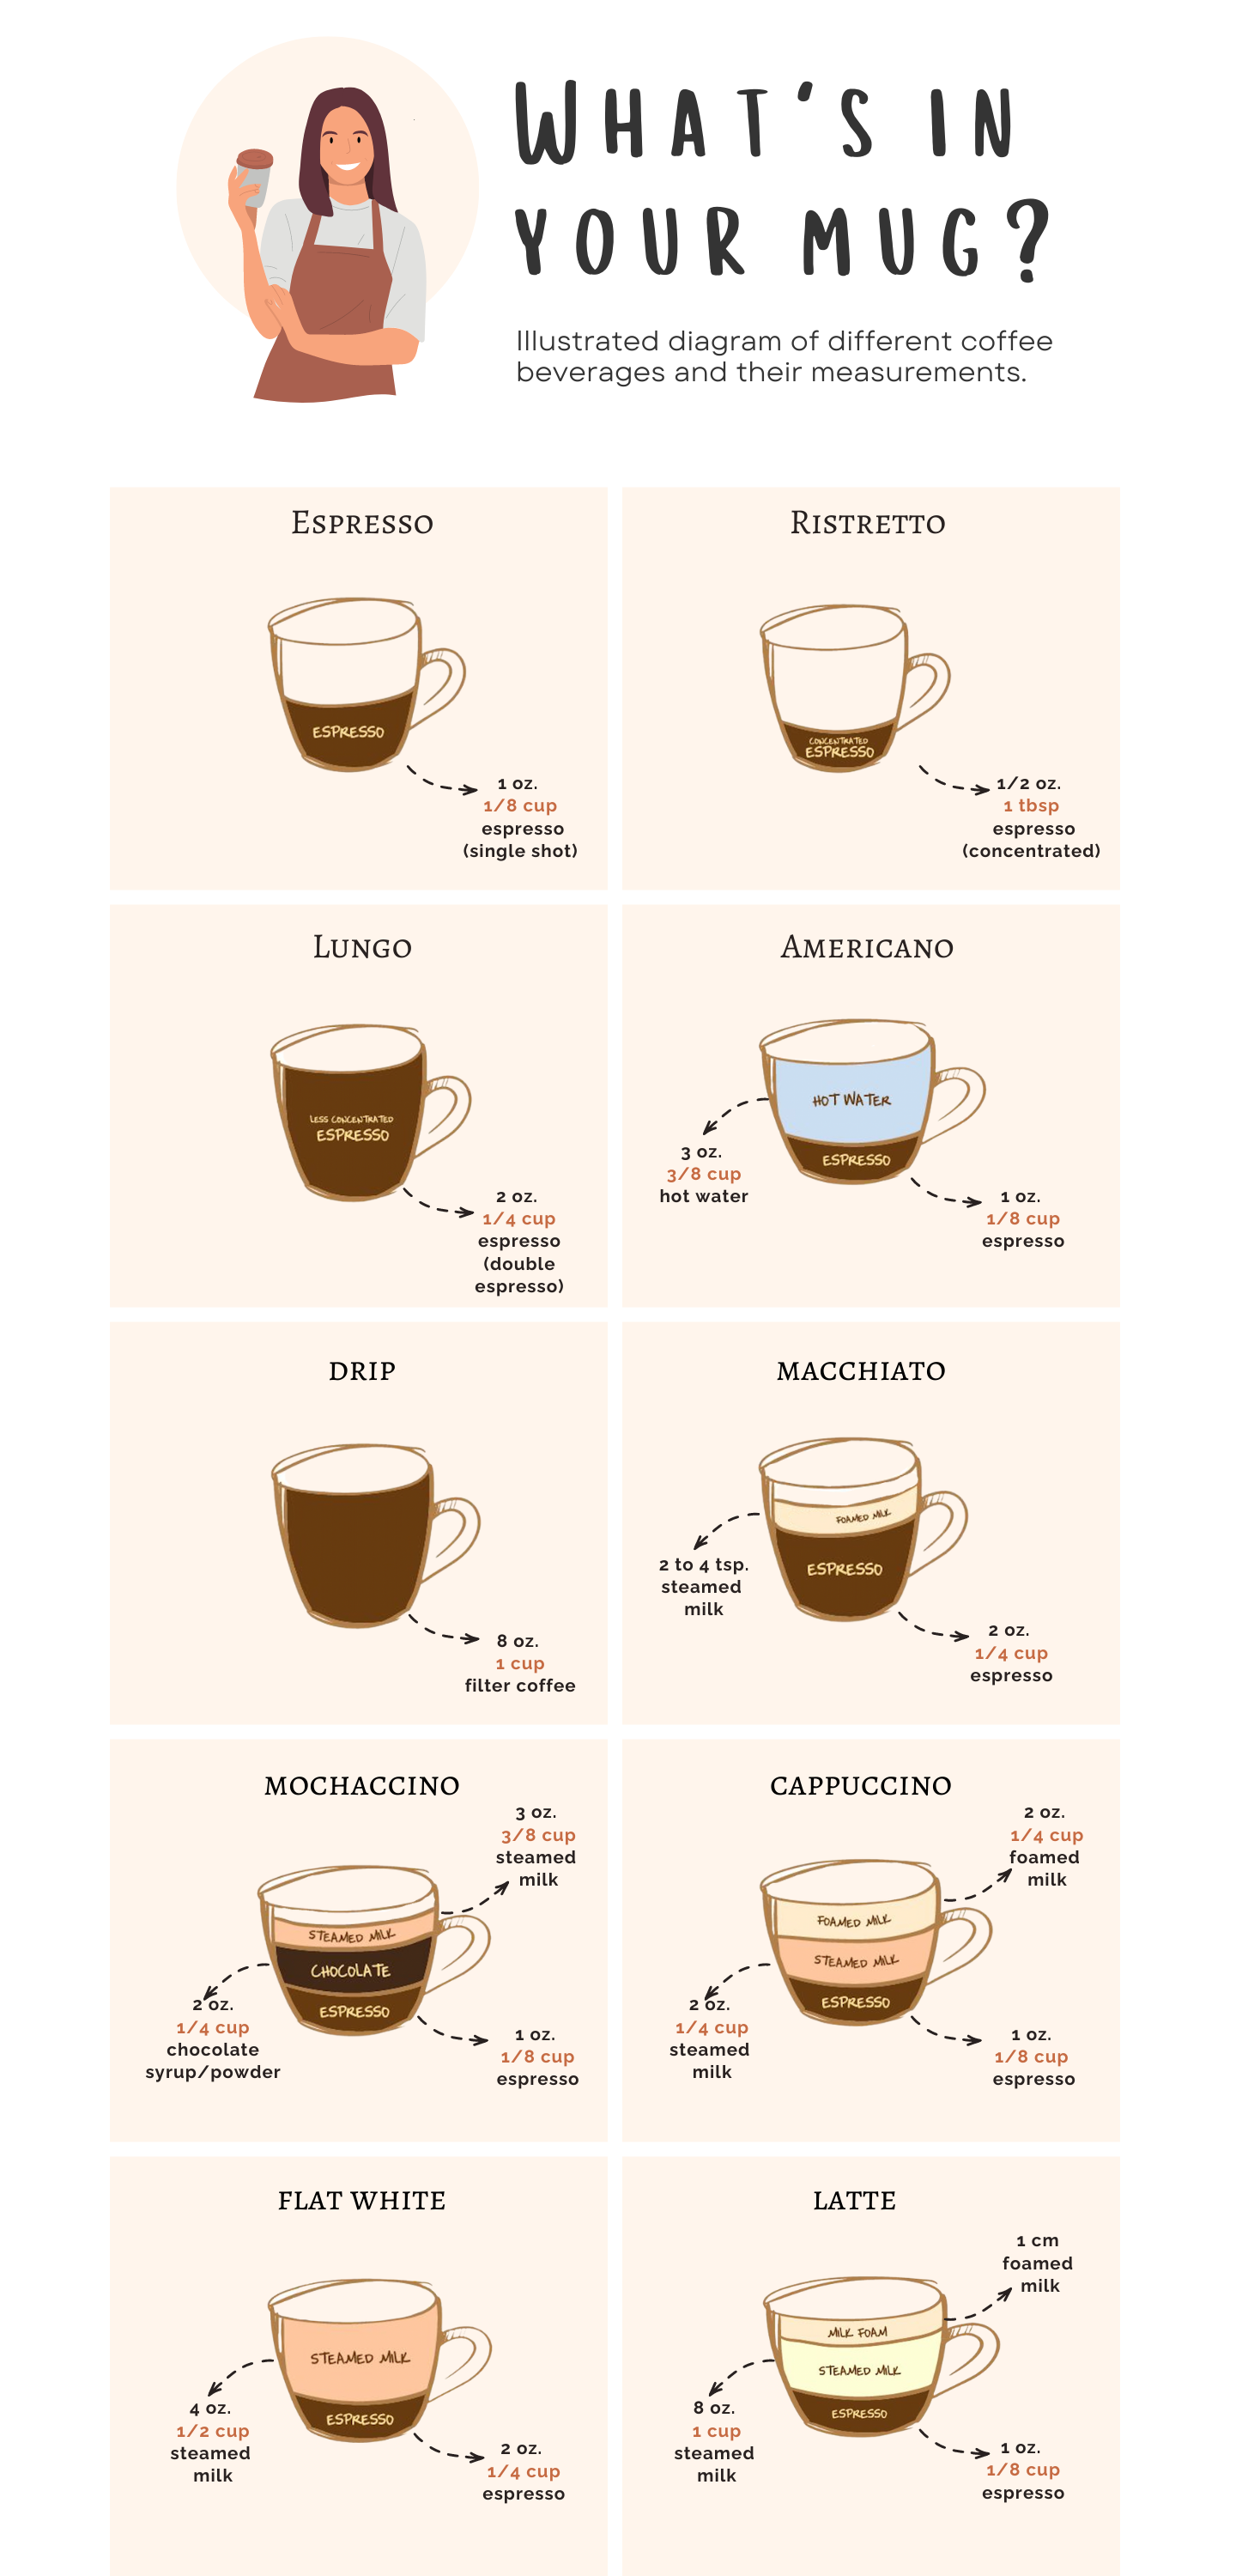 What’s in your mug? Diagram of different coffee beverages and their measurements.